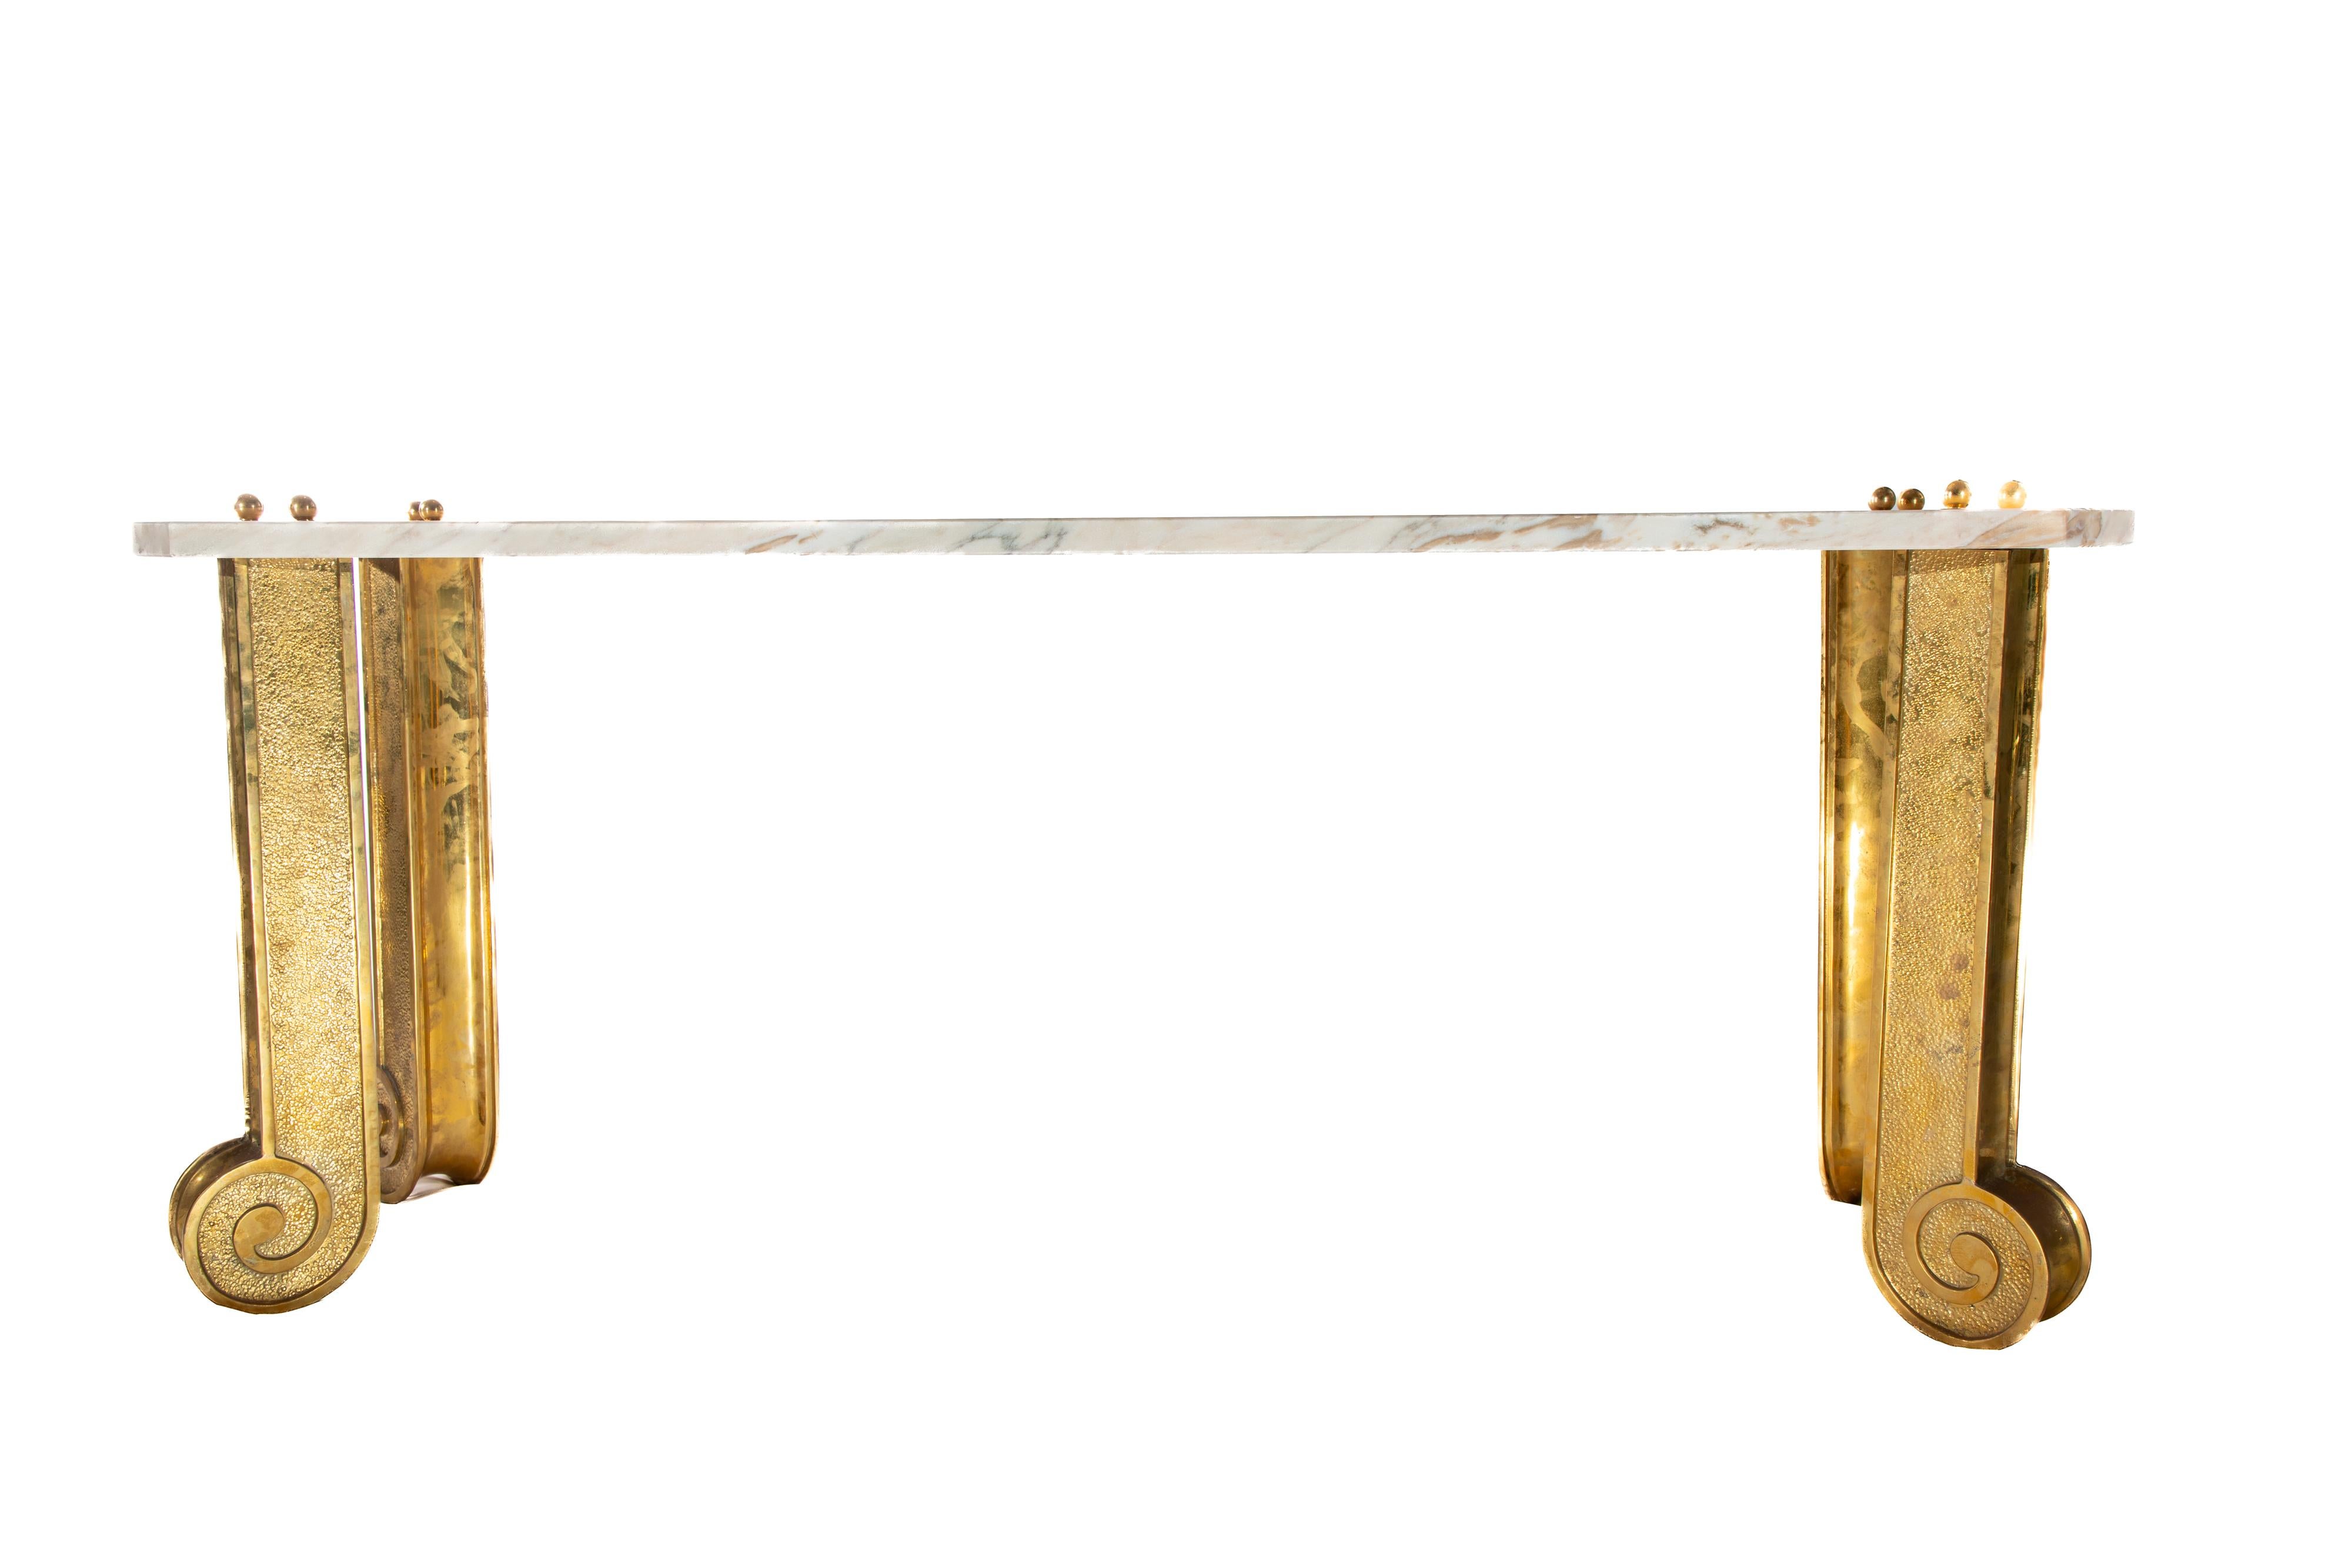 European Stunning Art Deco Gilt Bronze Console Table with Marble Top For Sale